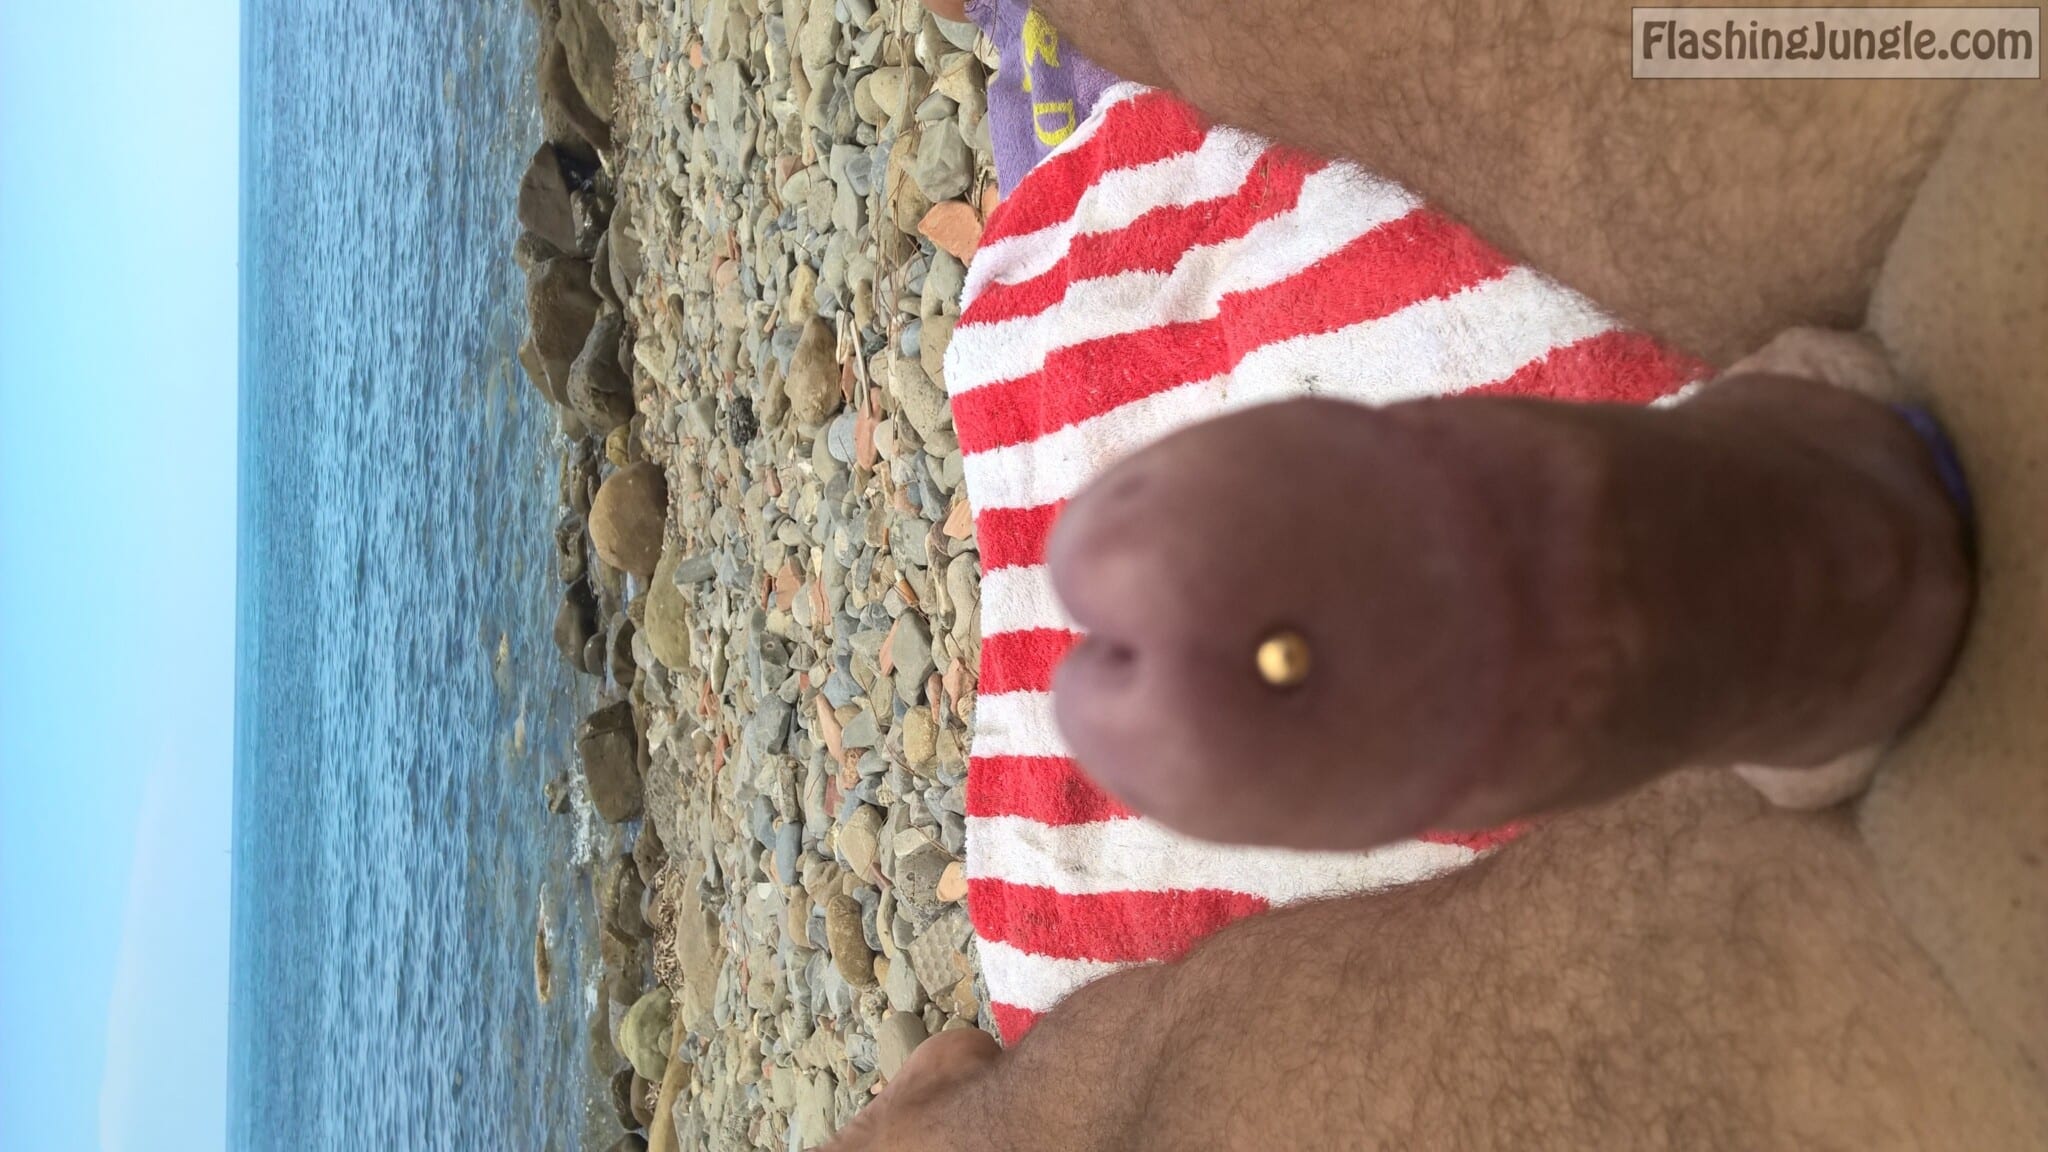 dick flash pic - Amateur dick flash on beach piercing show off Pure amateur naturist and exhibitionist enjoying in touching his small cock in public and showing off his brand new piercing. Public beach dick flash amateur pics submitted by our visitor. nude beach... - Dick Flash Pics